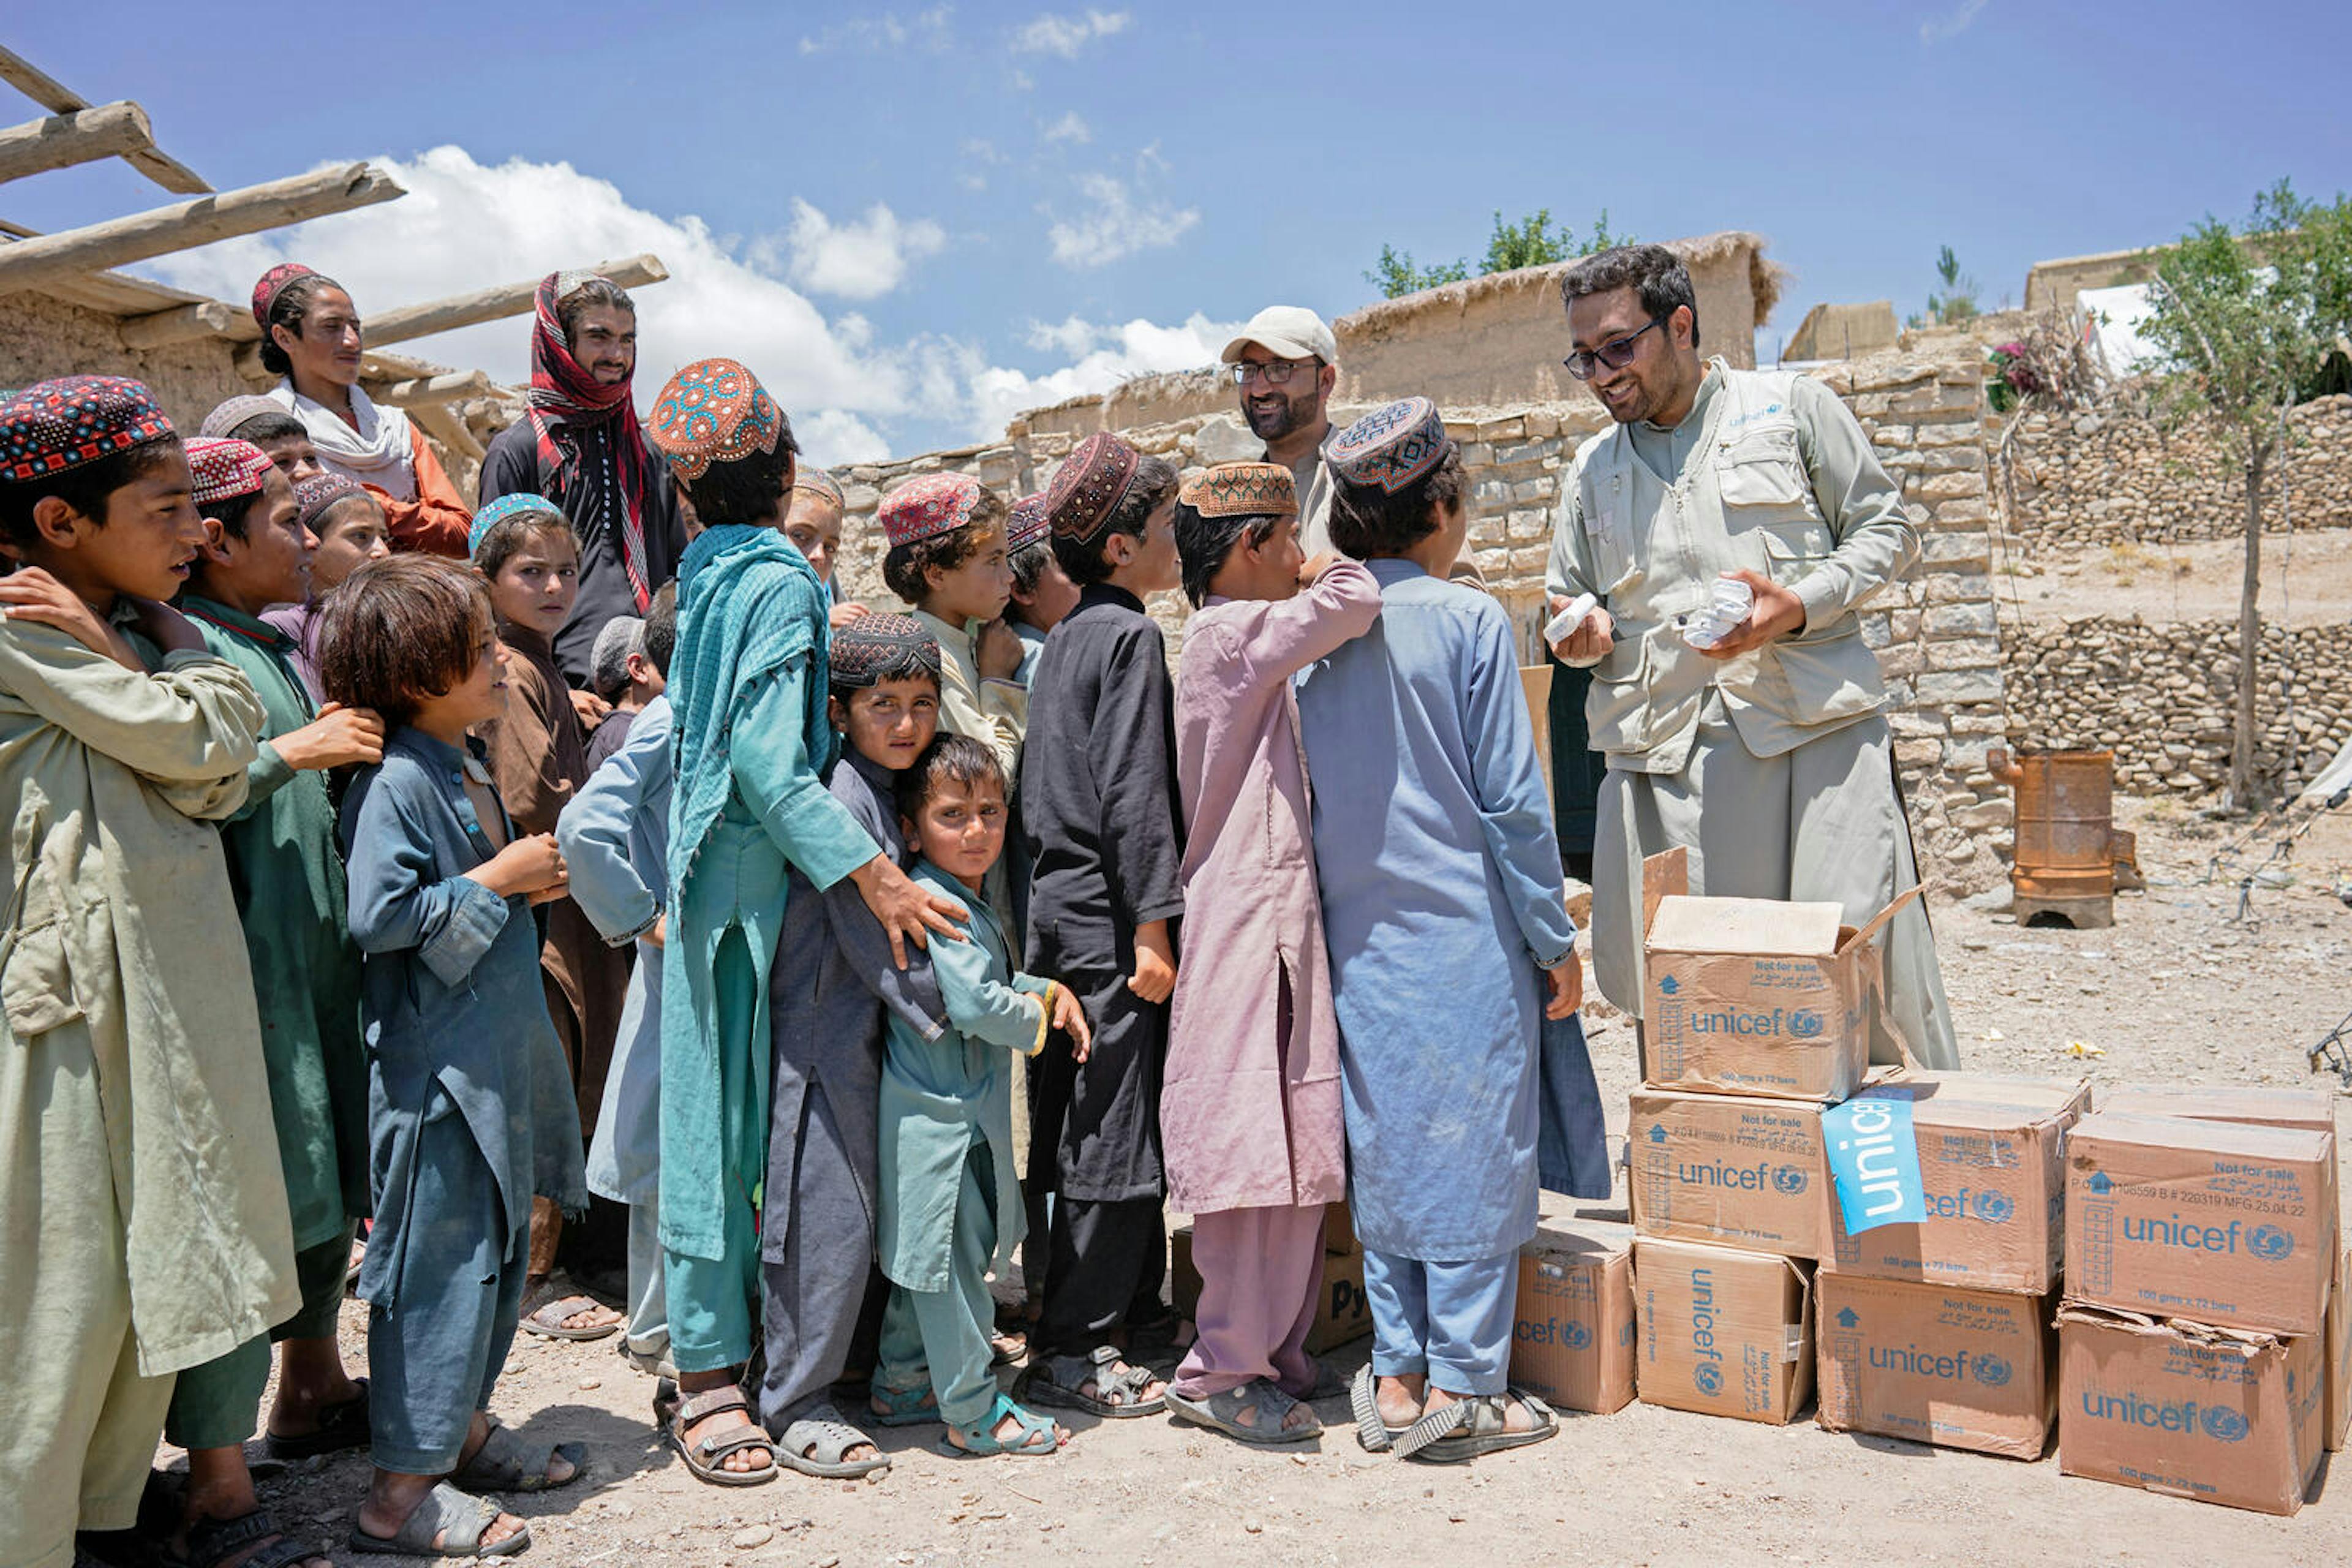 Hygiene items were distributed to families in the Paktika Province, Afghanistan. Items like soap and water purification tablets help prevent the spread of disease in the aftermath of a natural disaster.